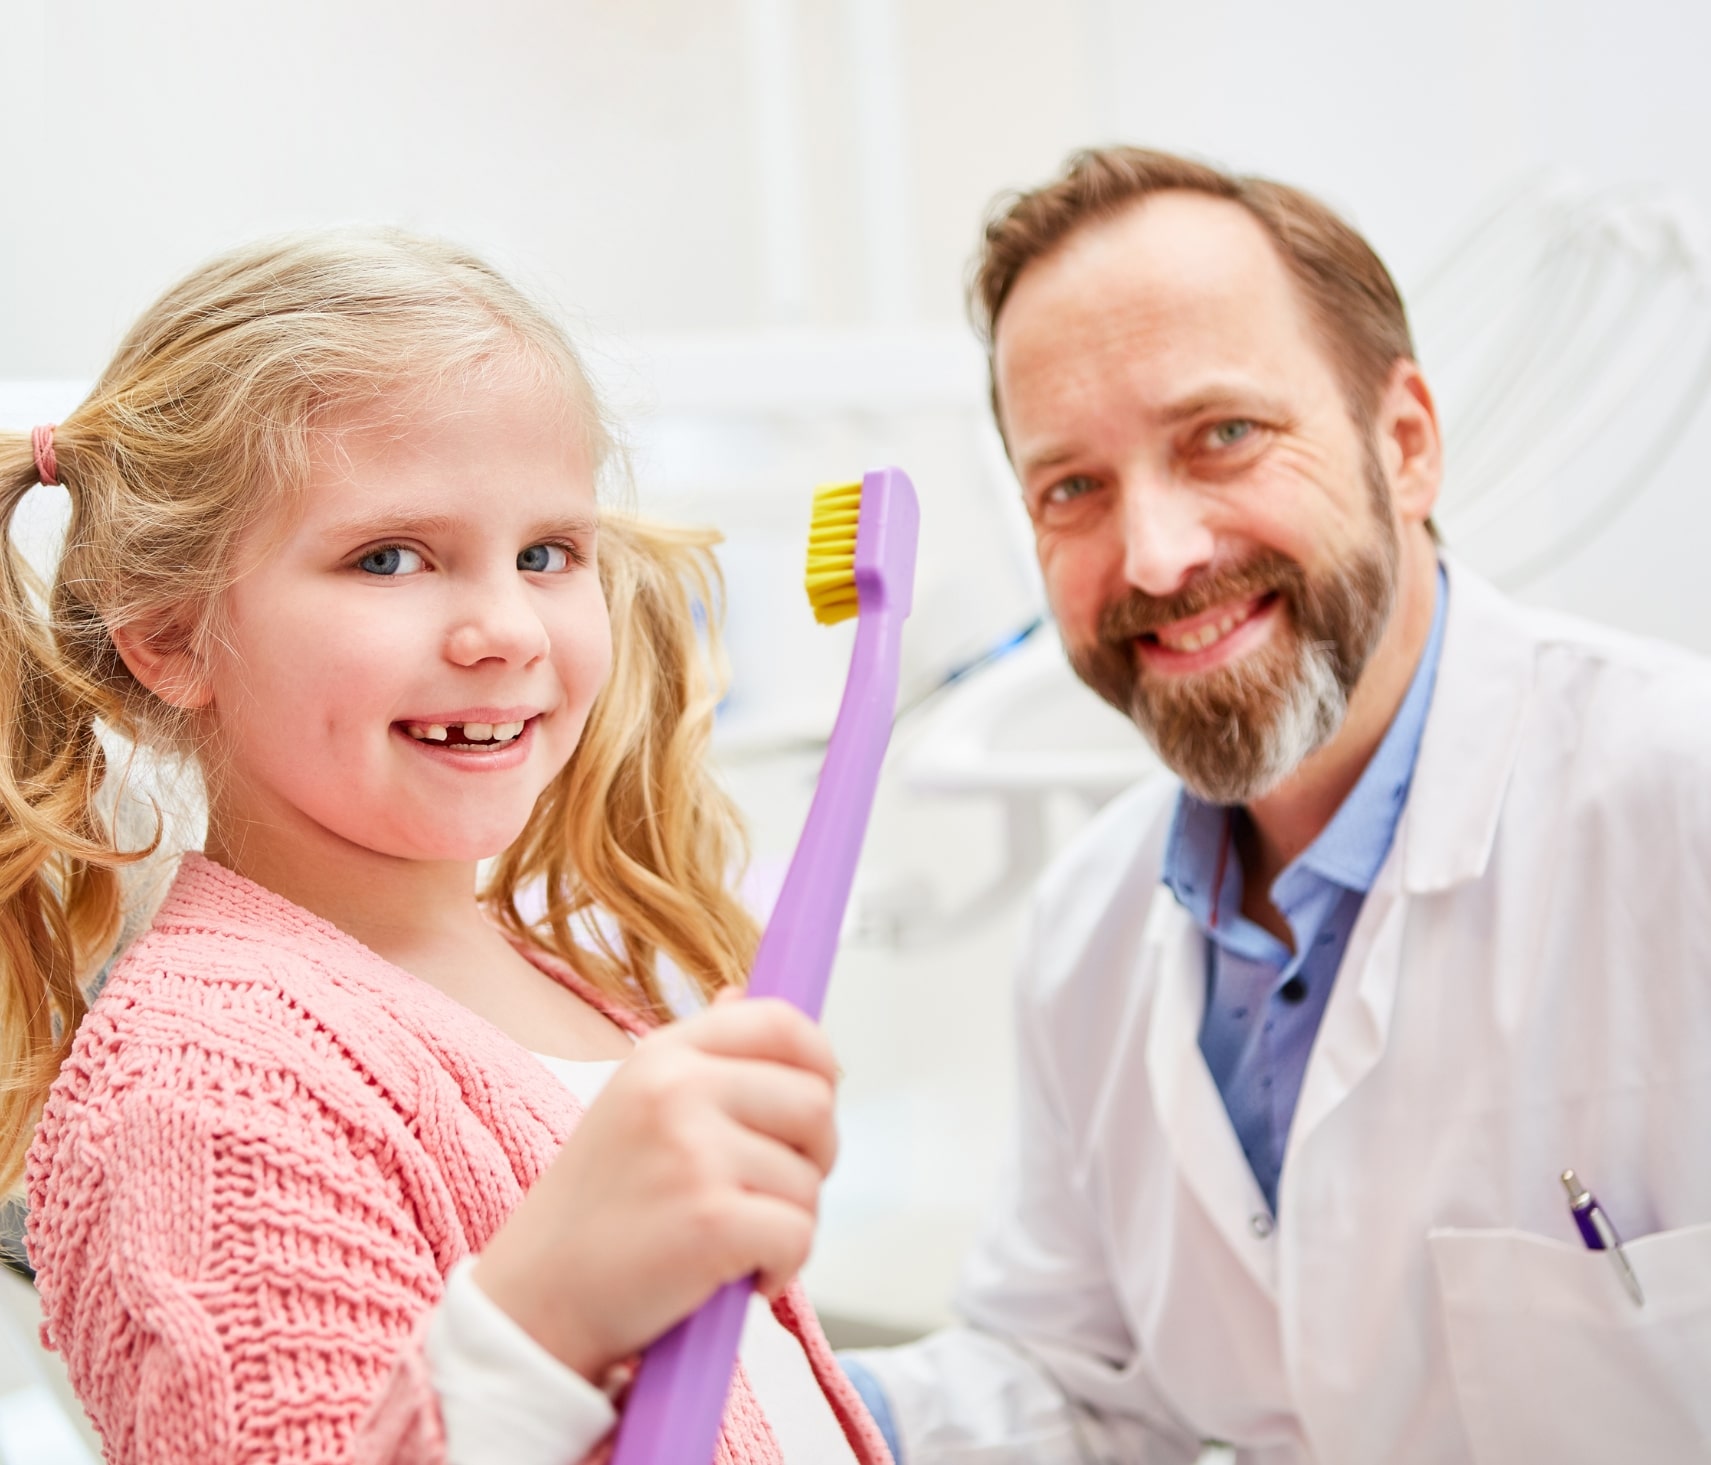 Searching for expert children's dentistry? Discover where you can find top-notch care for your little ones.